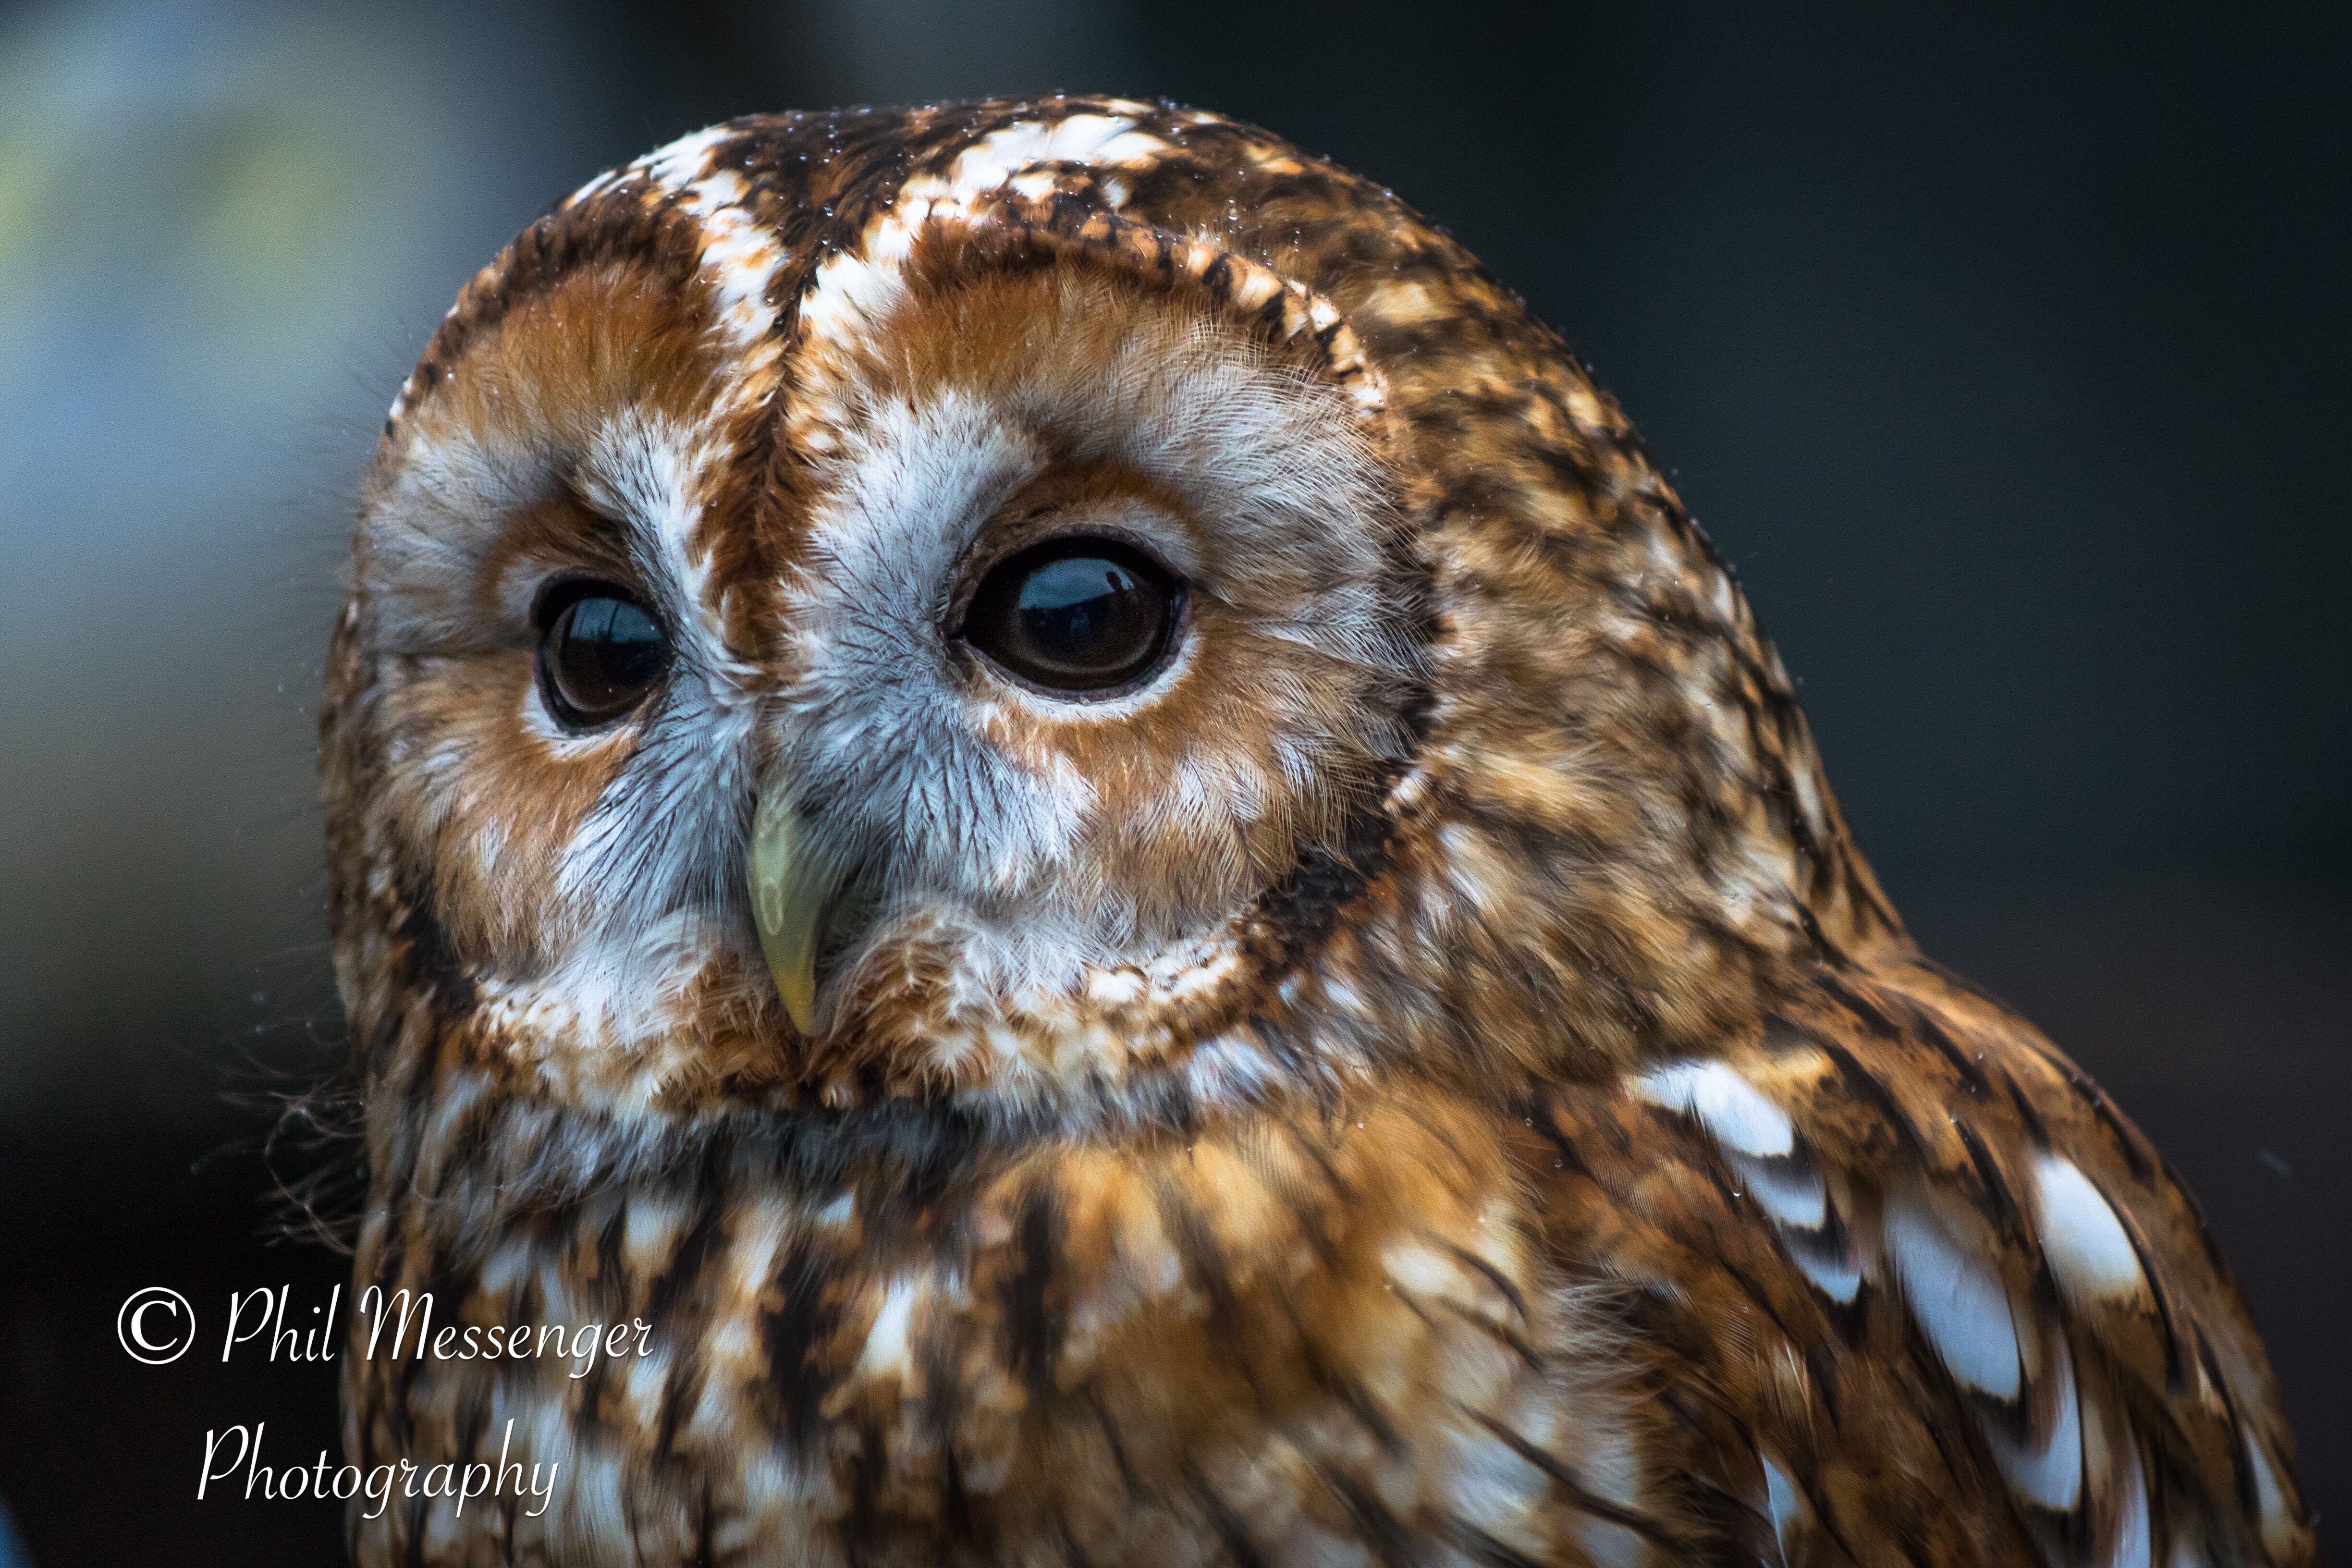 Tawny owl taken at Millets falconry centre, Oxfordshire.